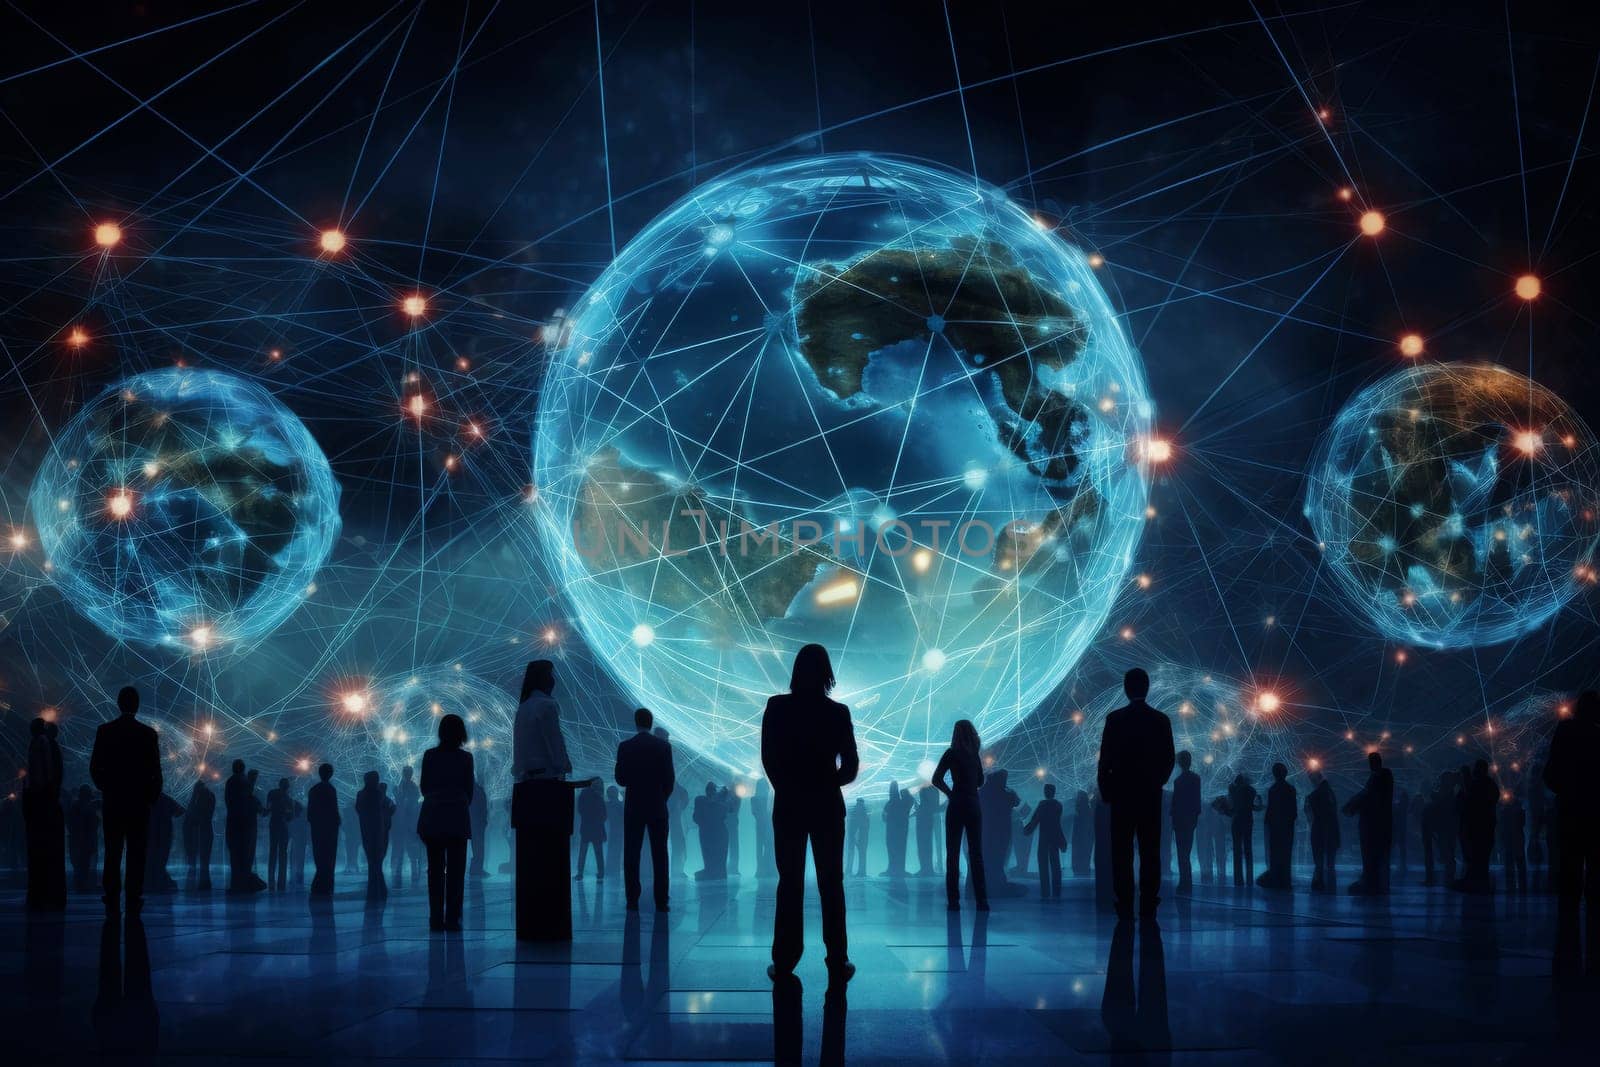 A conceptual image depicting a global business network with figures connected by light surrounding a glowing earth, symbolizing worldwide communication and collaboration